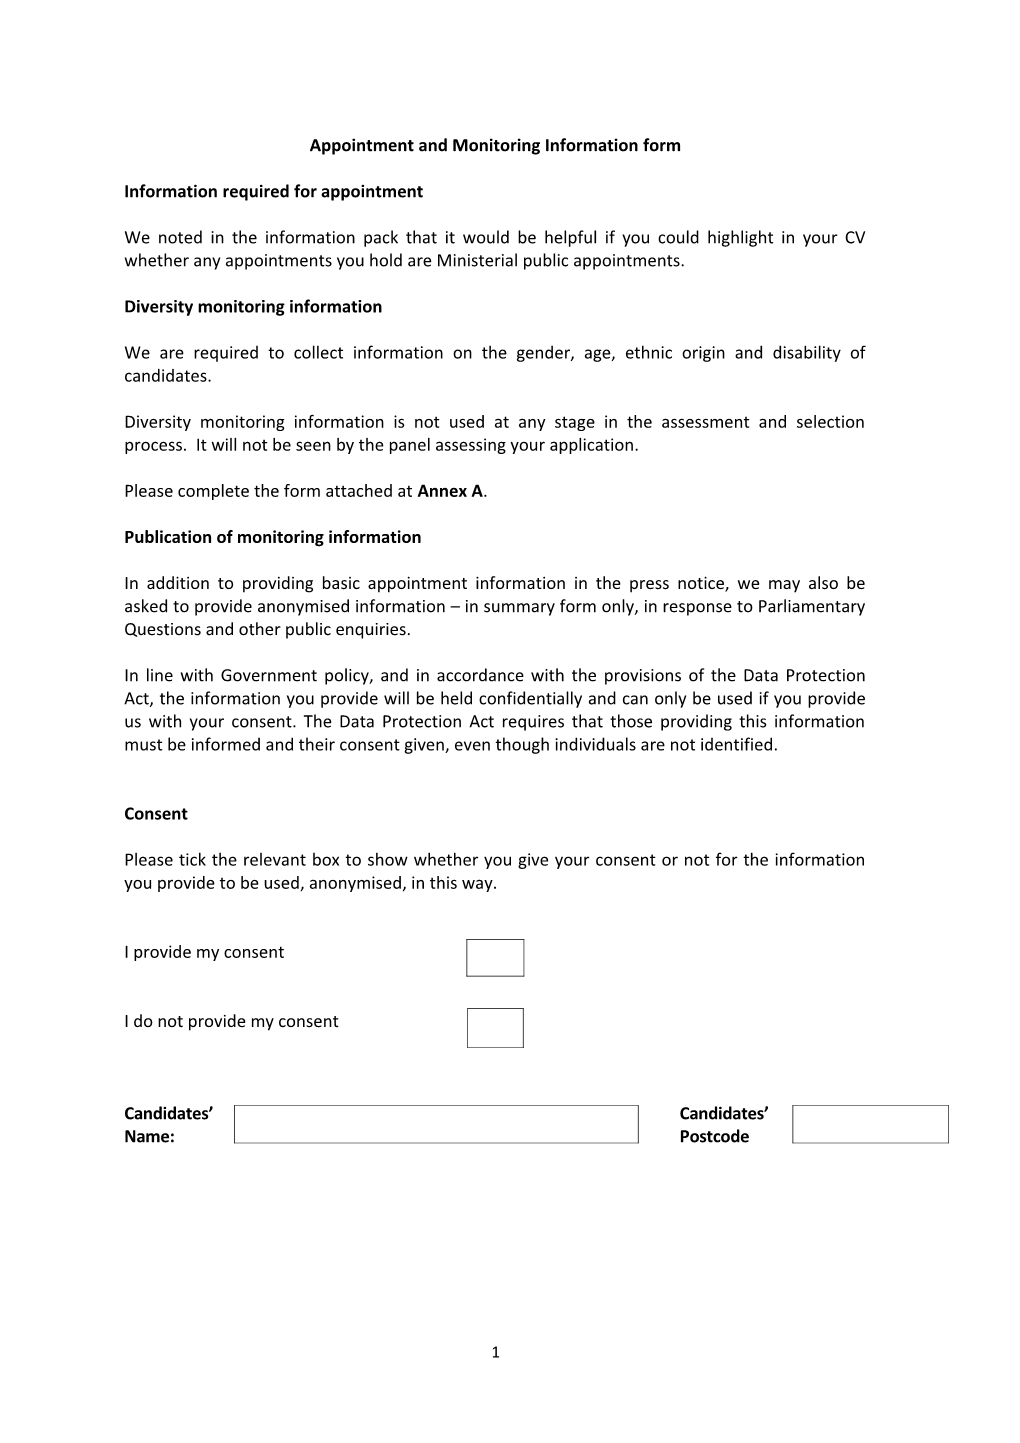 Appointment and Monitoring Information Form